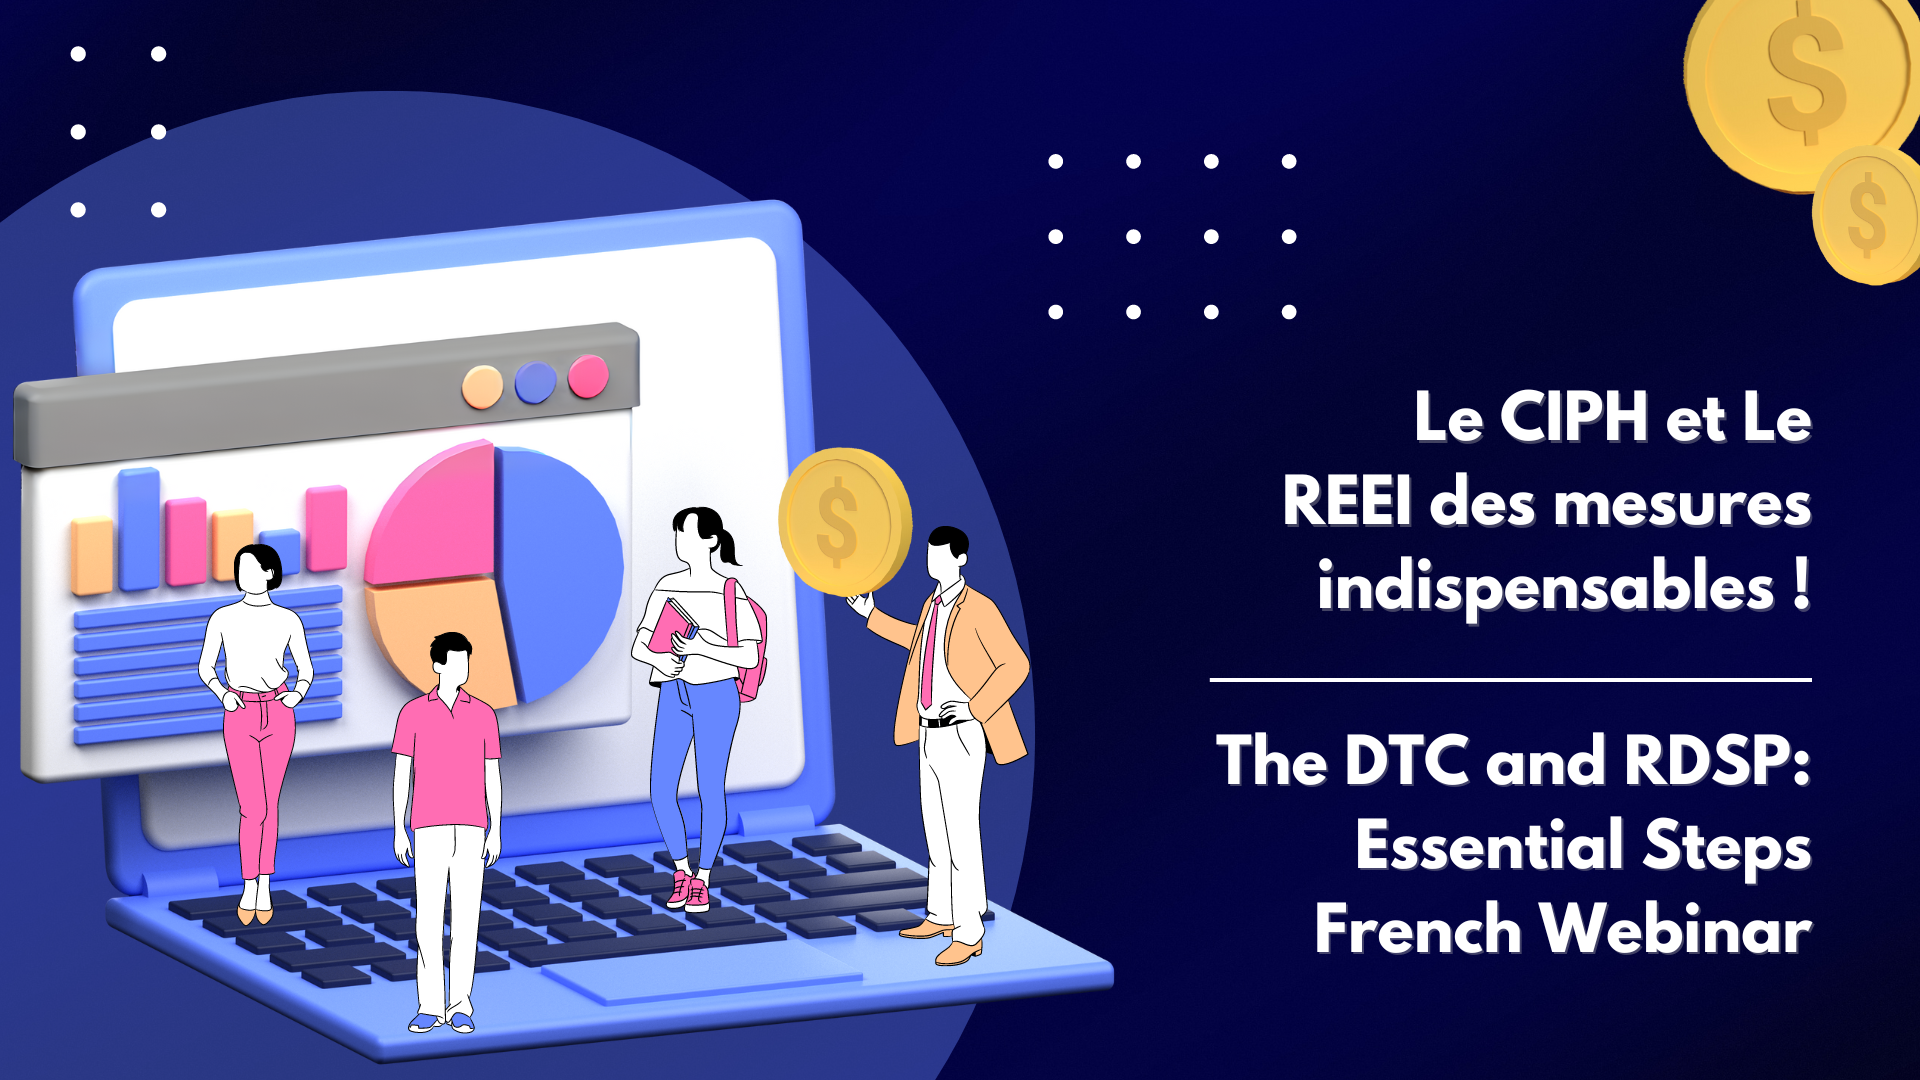 3D illustration of a laptop with a bar chart and pie chart on the screen. Illustration of people standing on the laptop keyboard, one person is holding a coin and there are more coins in the top right corner. Text reads, The DTC and RDSP: Essential Steps French Webinar, and repeats in French.